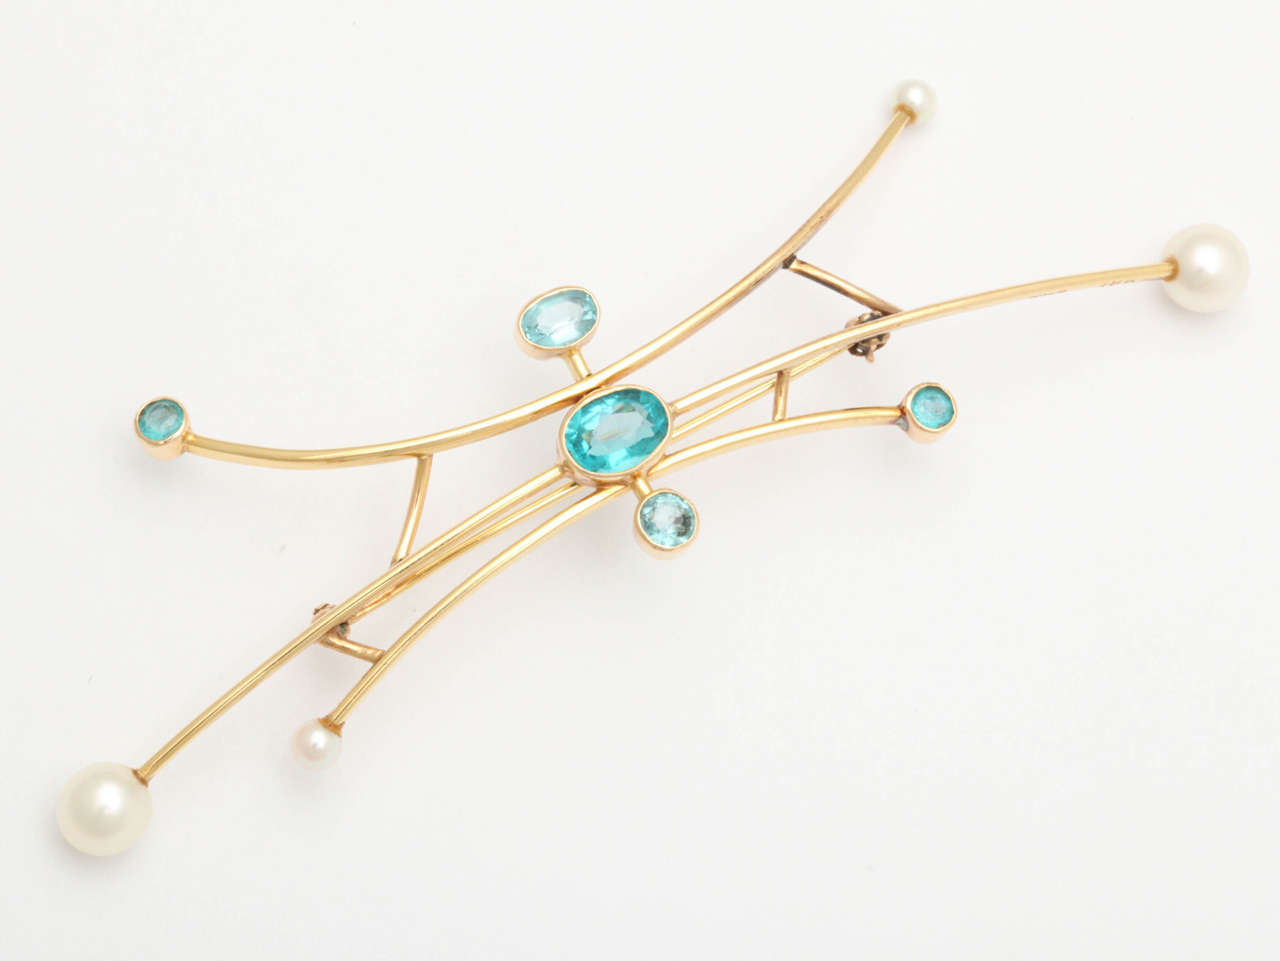 Of curved linear design, in 18k gold accented with light blue Murano glass and cultured pearls.

20th century, signed.

4 in. (10.2 cm.) long.

Maurice Brault (1930-2018) was a Montreal based jeweler, enameler and silversmith. Brault studied in